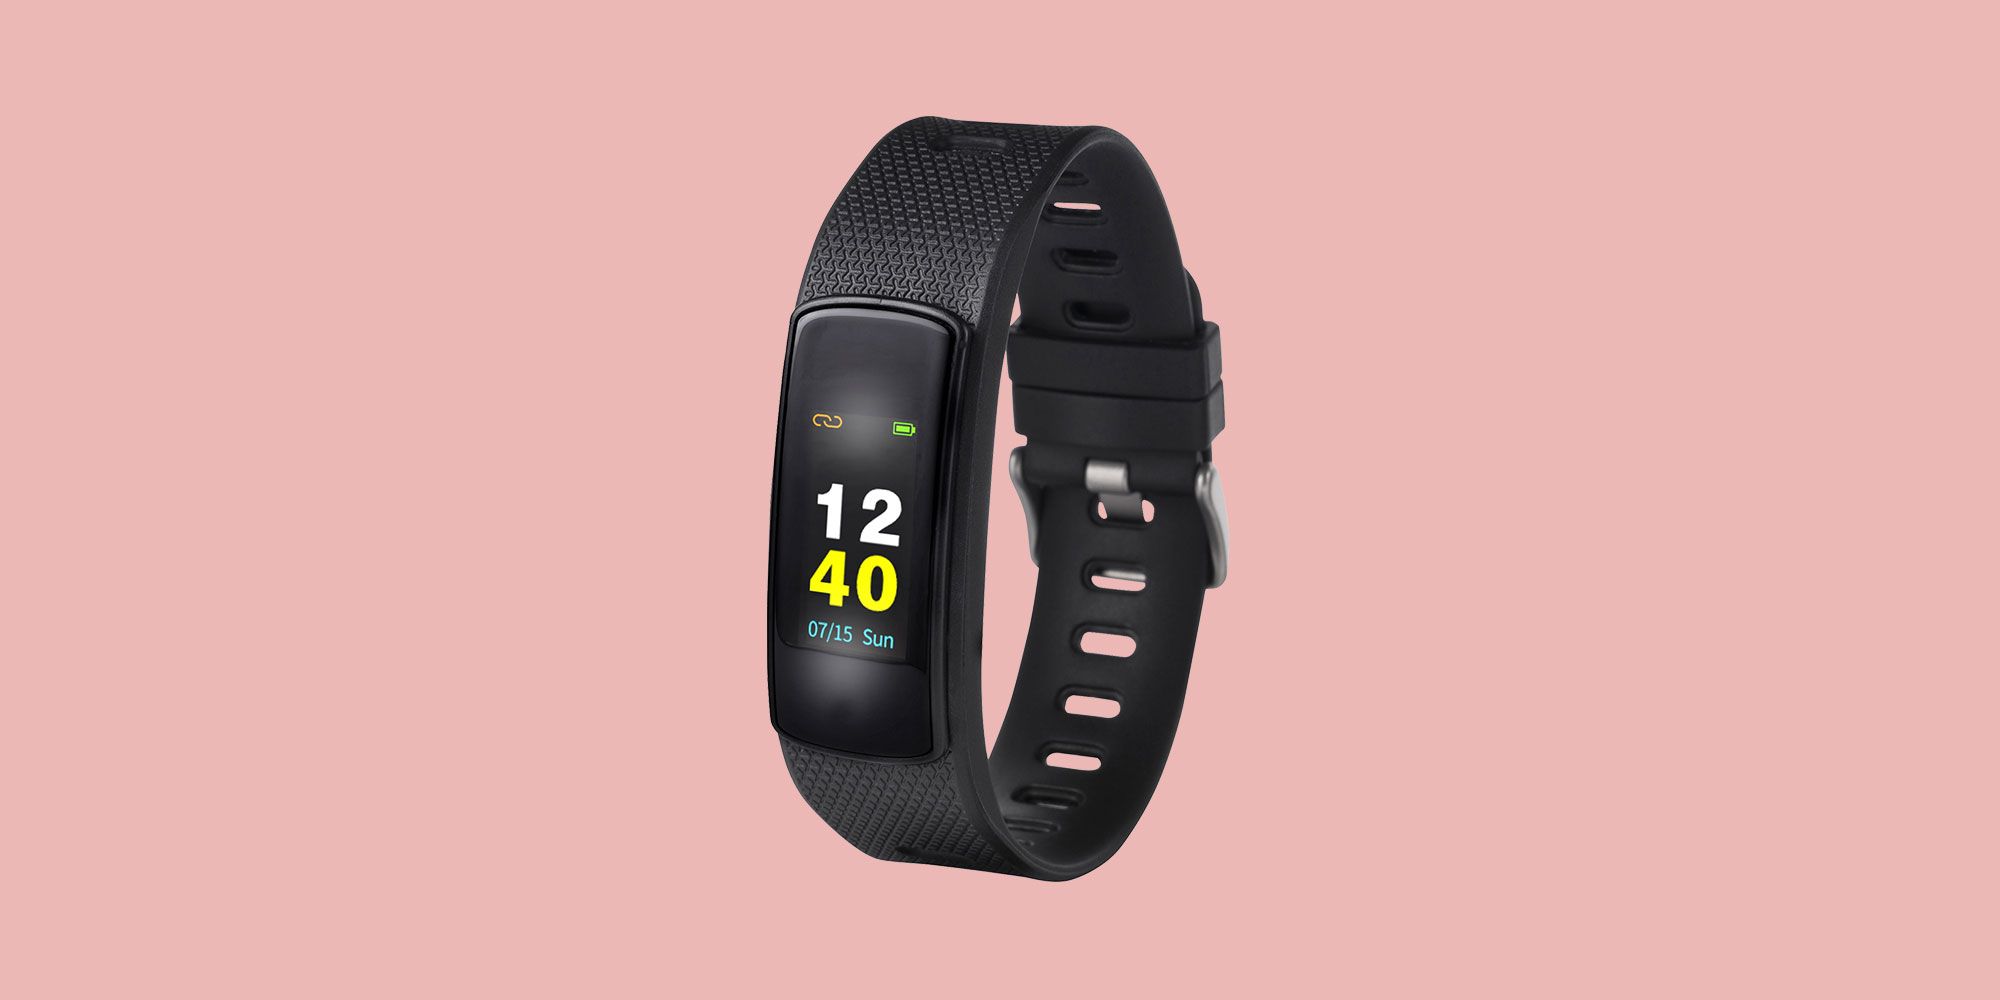 how to change the time on a nuband fitbit